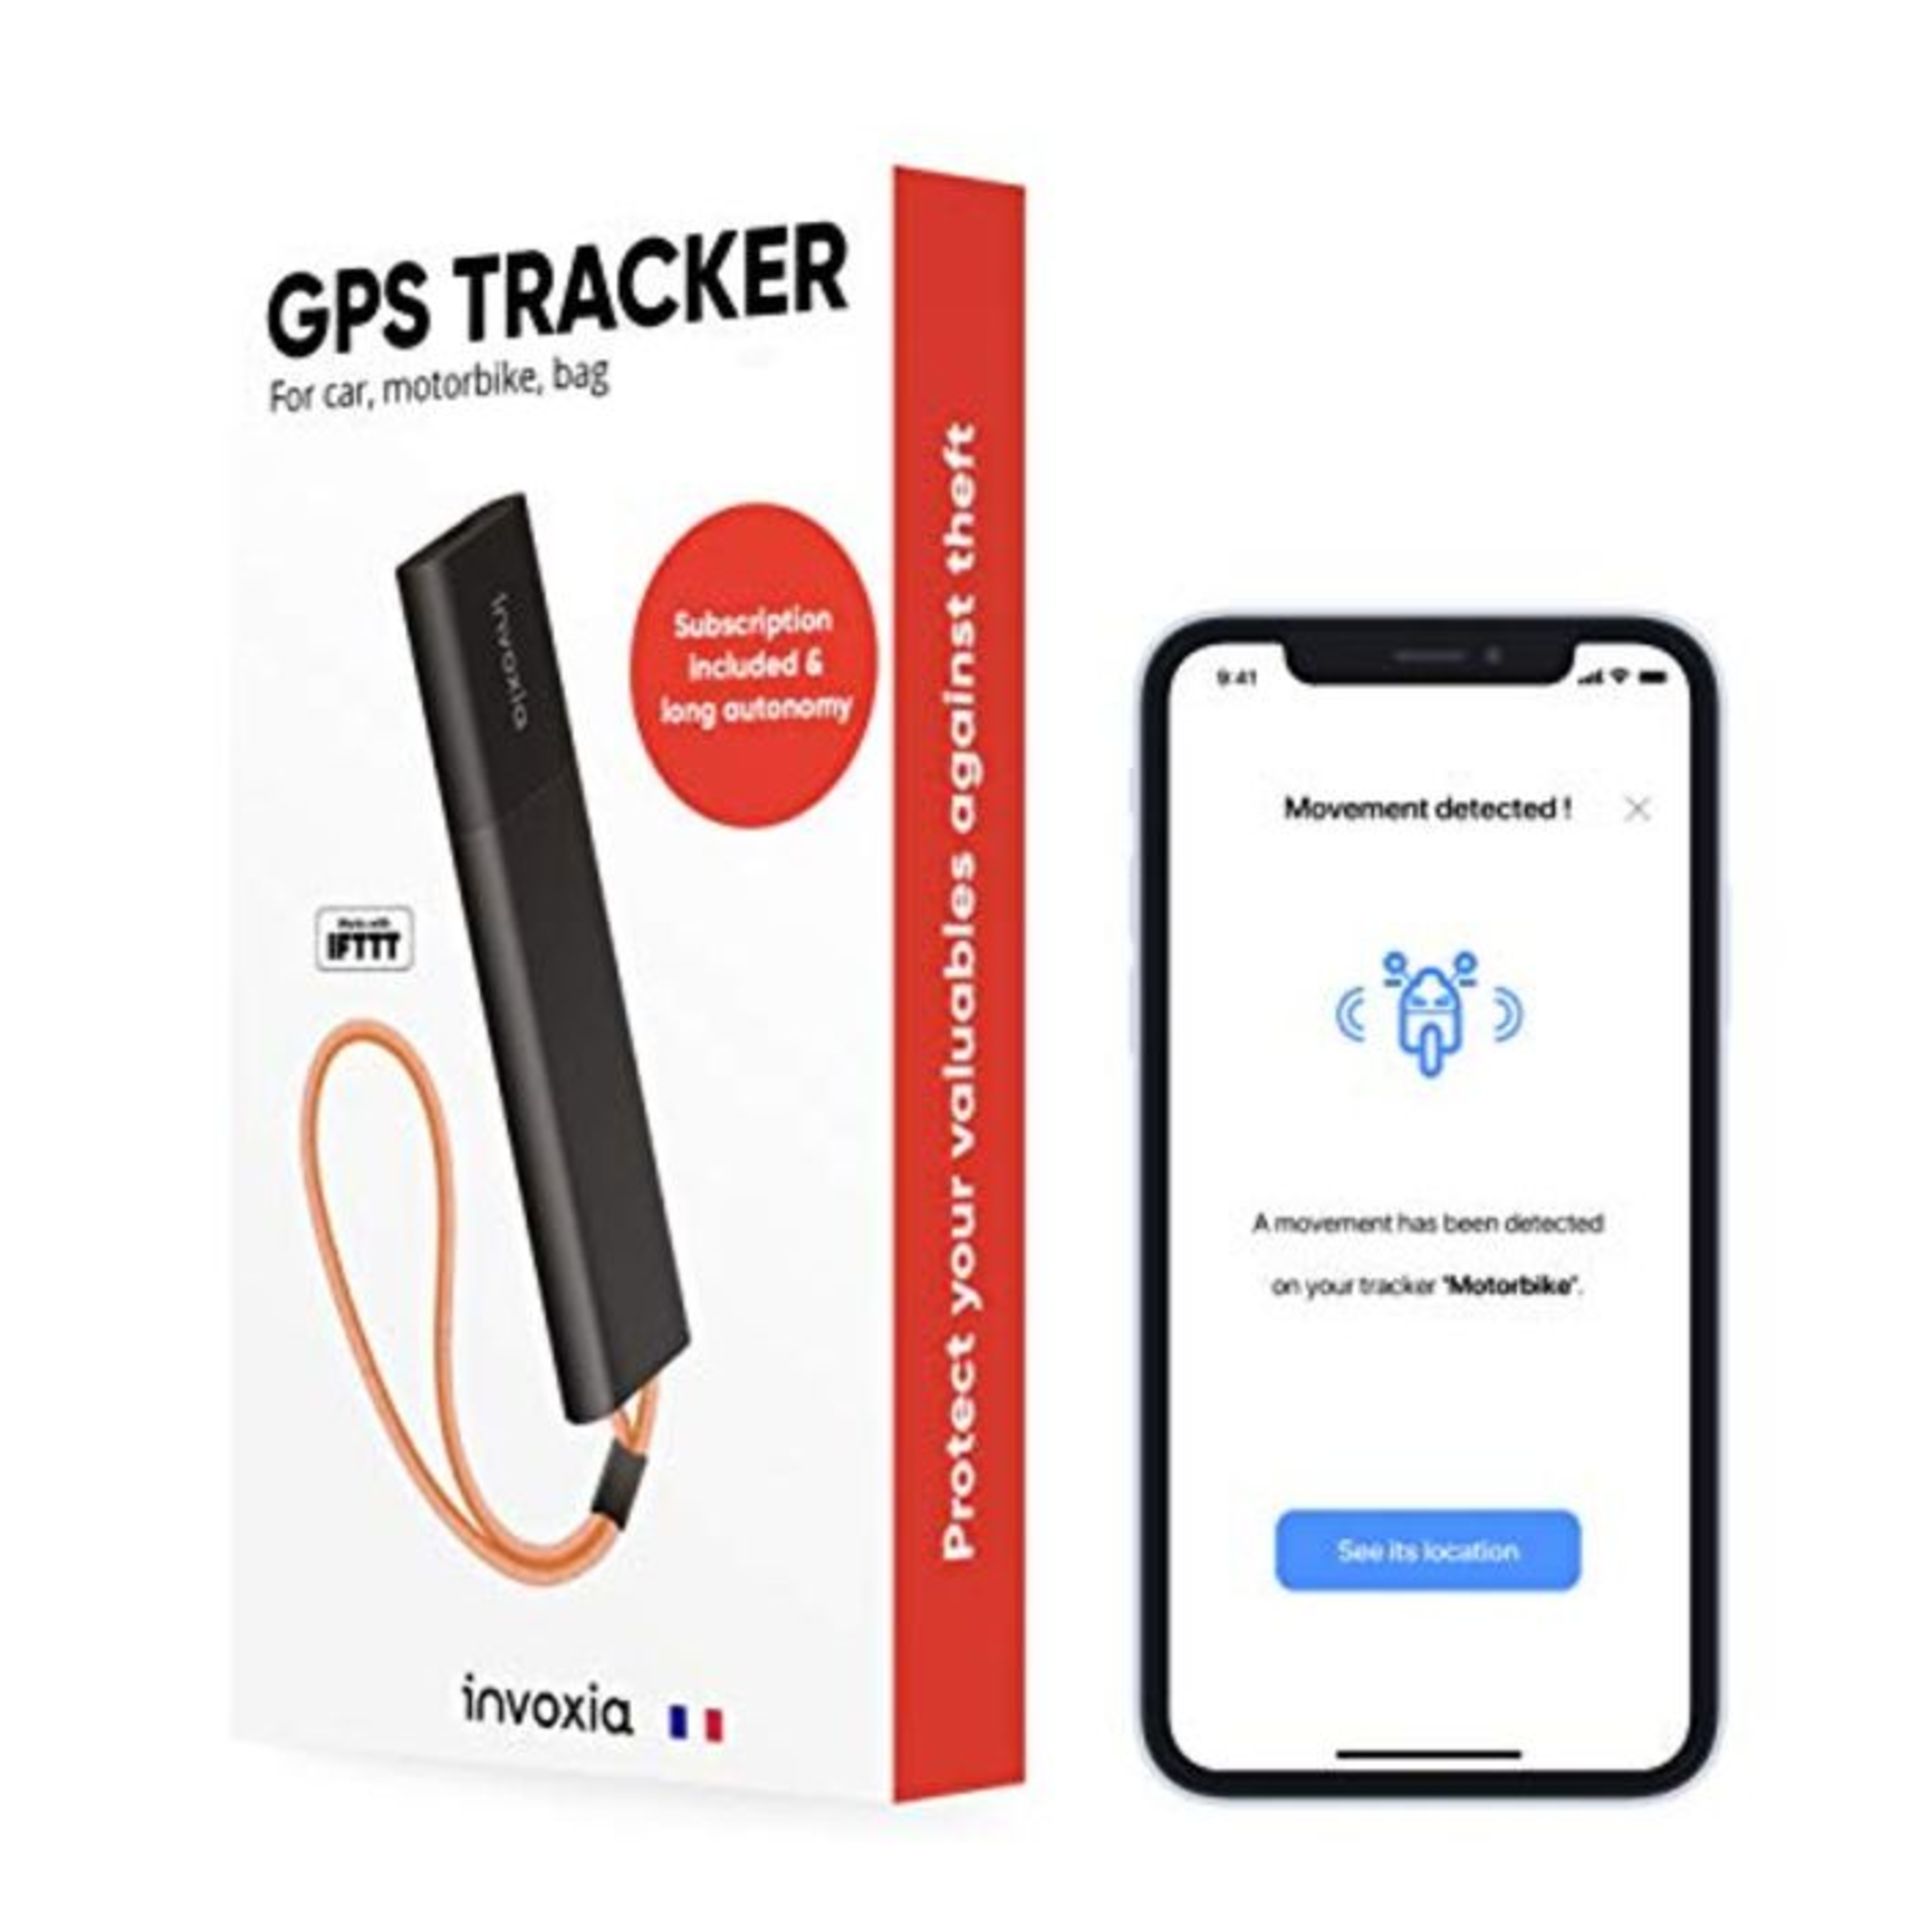 RRP £109.00 invoxia GPS Tracker with anti-theft alert - subscription included - Track: your car, m - Image 3 of 4